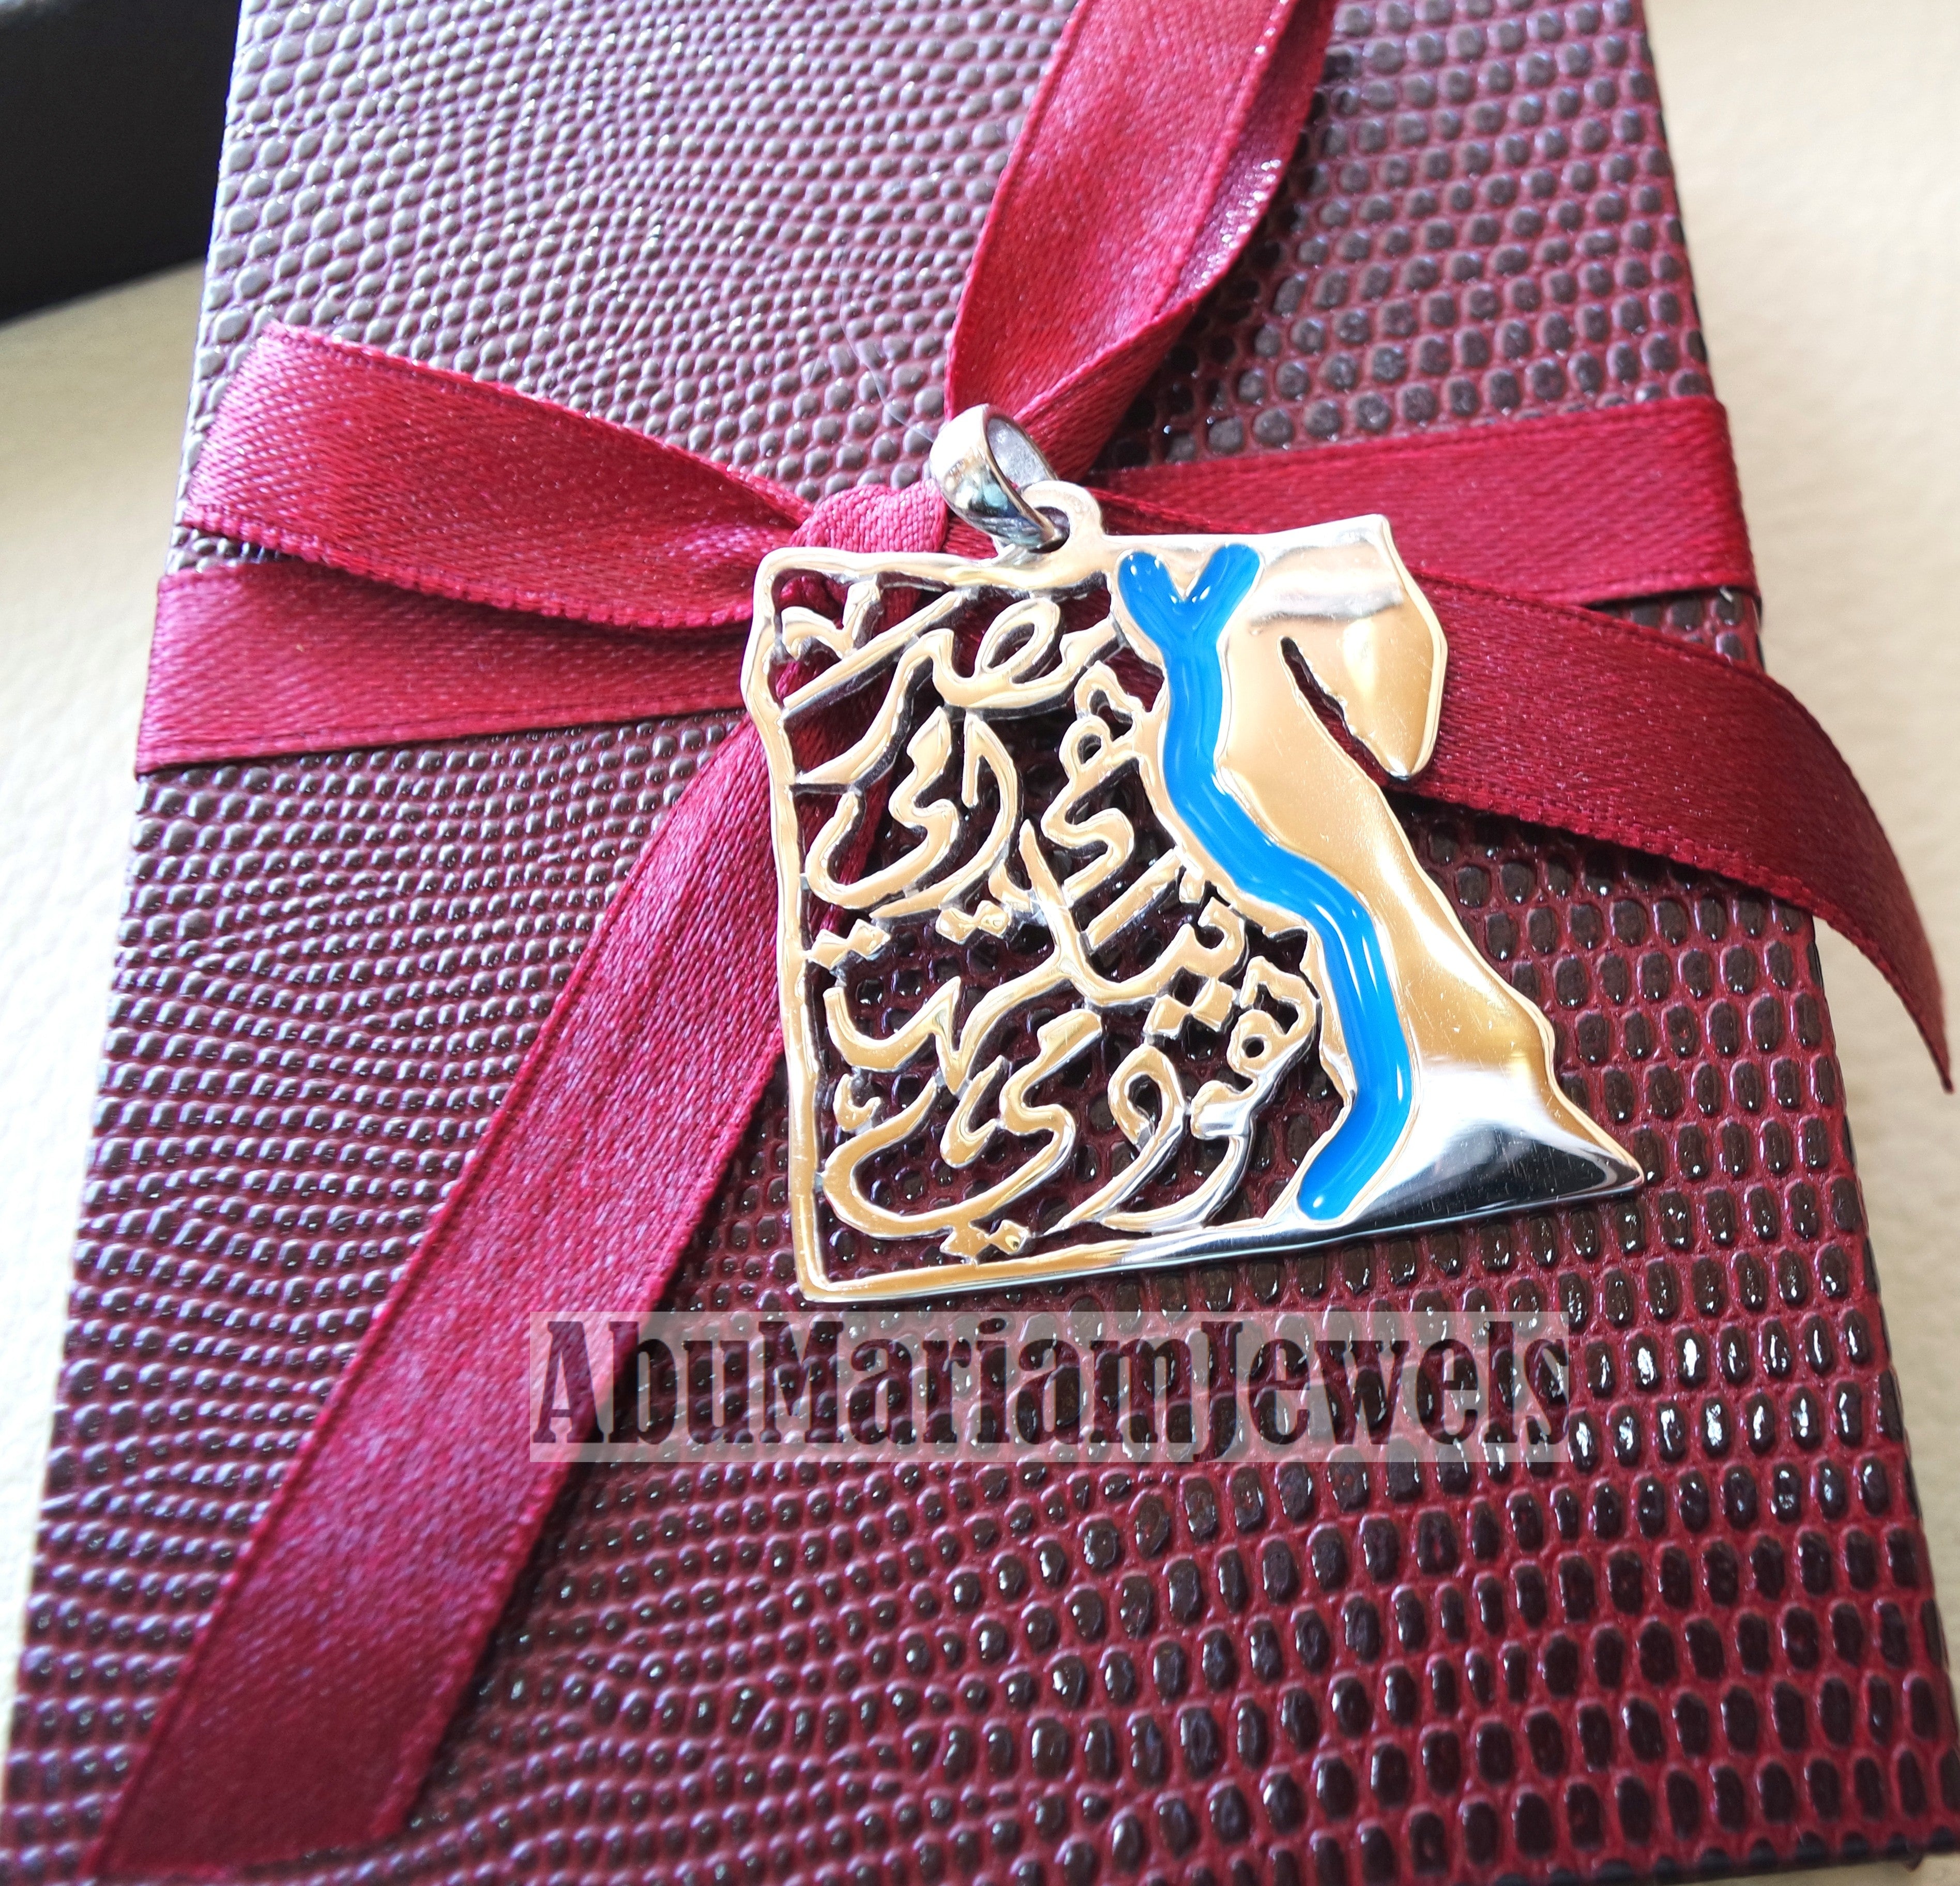 Egypt map pendant traditional verse sterling silver 925 calligraphy blue enamel jewelry arabic fast shipping خريطة مصر